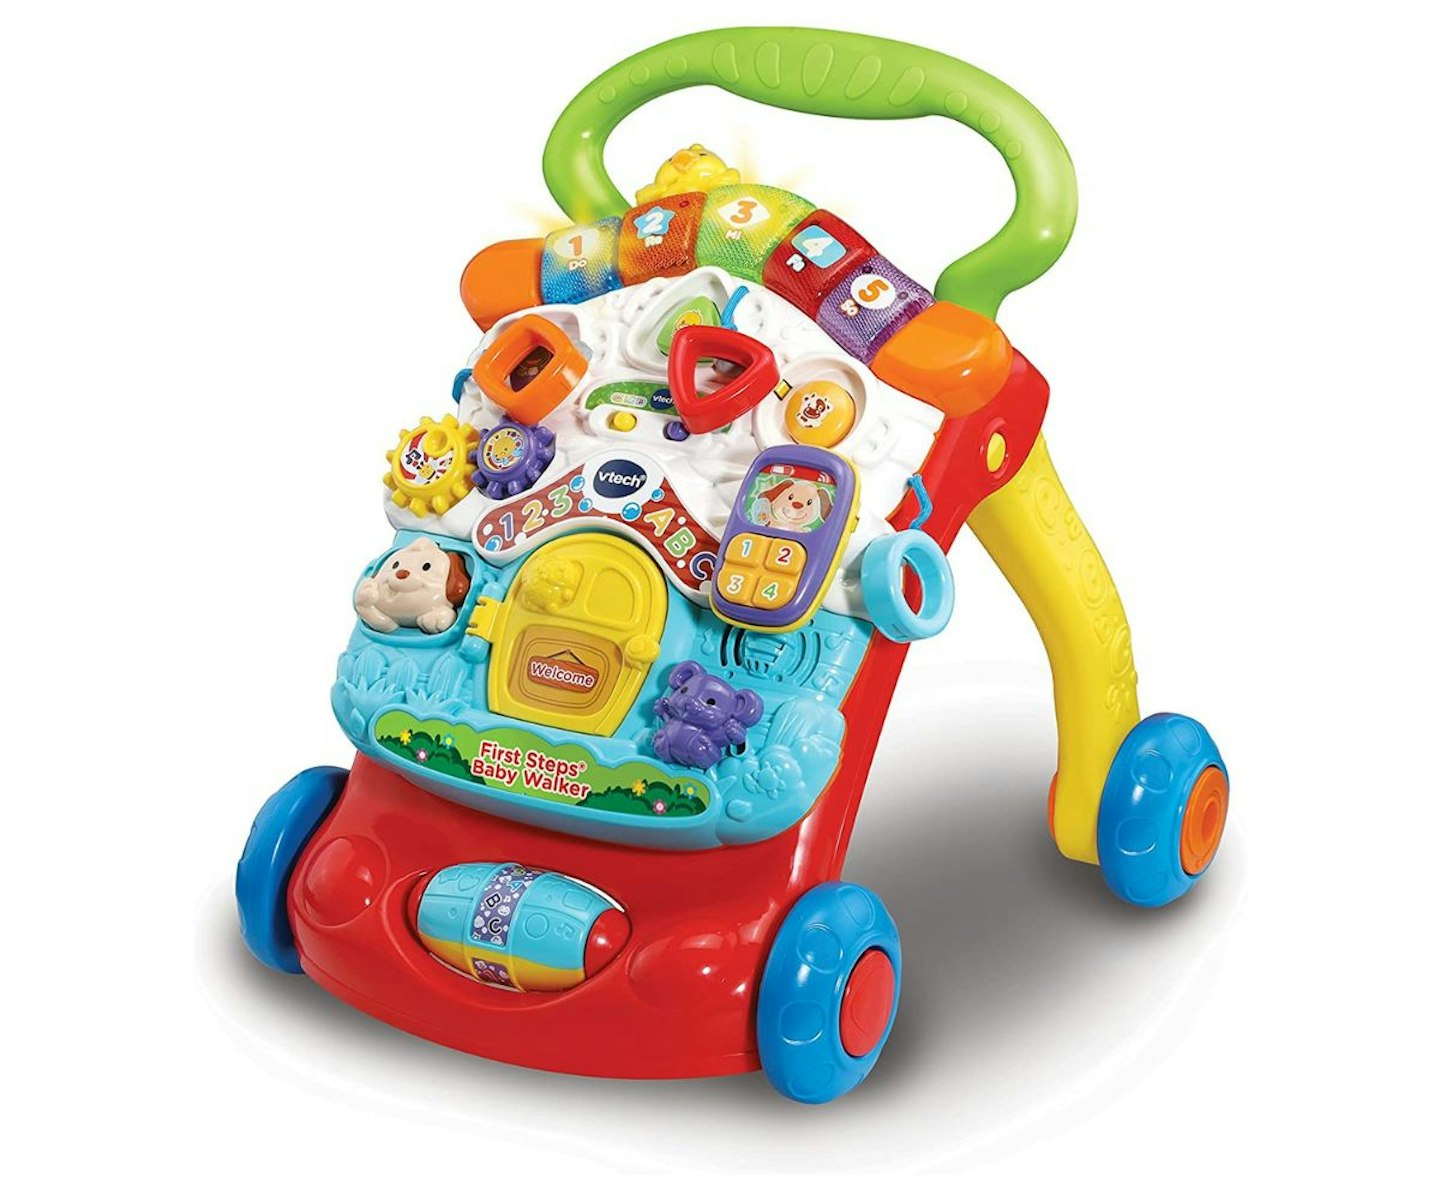 TOP 10 Best Toys for 1 year old! Vtech, Fisher Price, LeapFrog and MORE! 